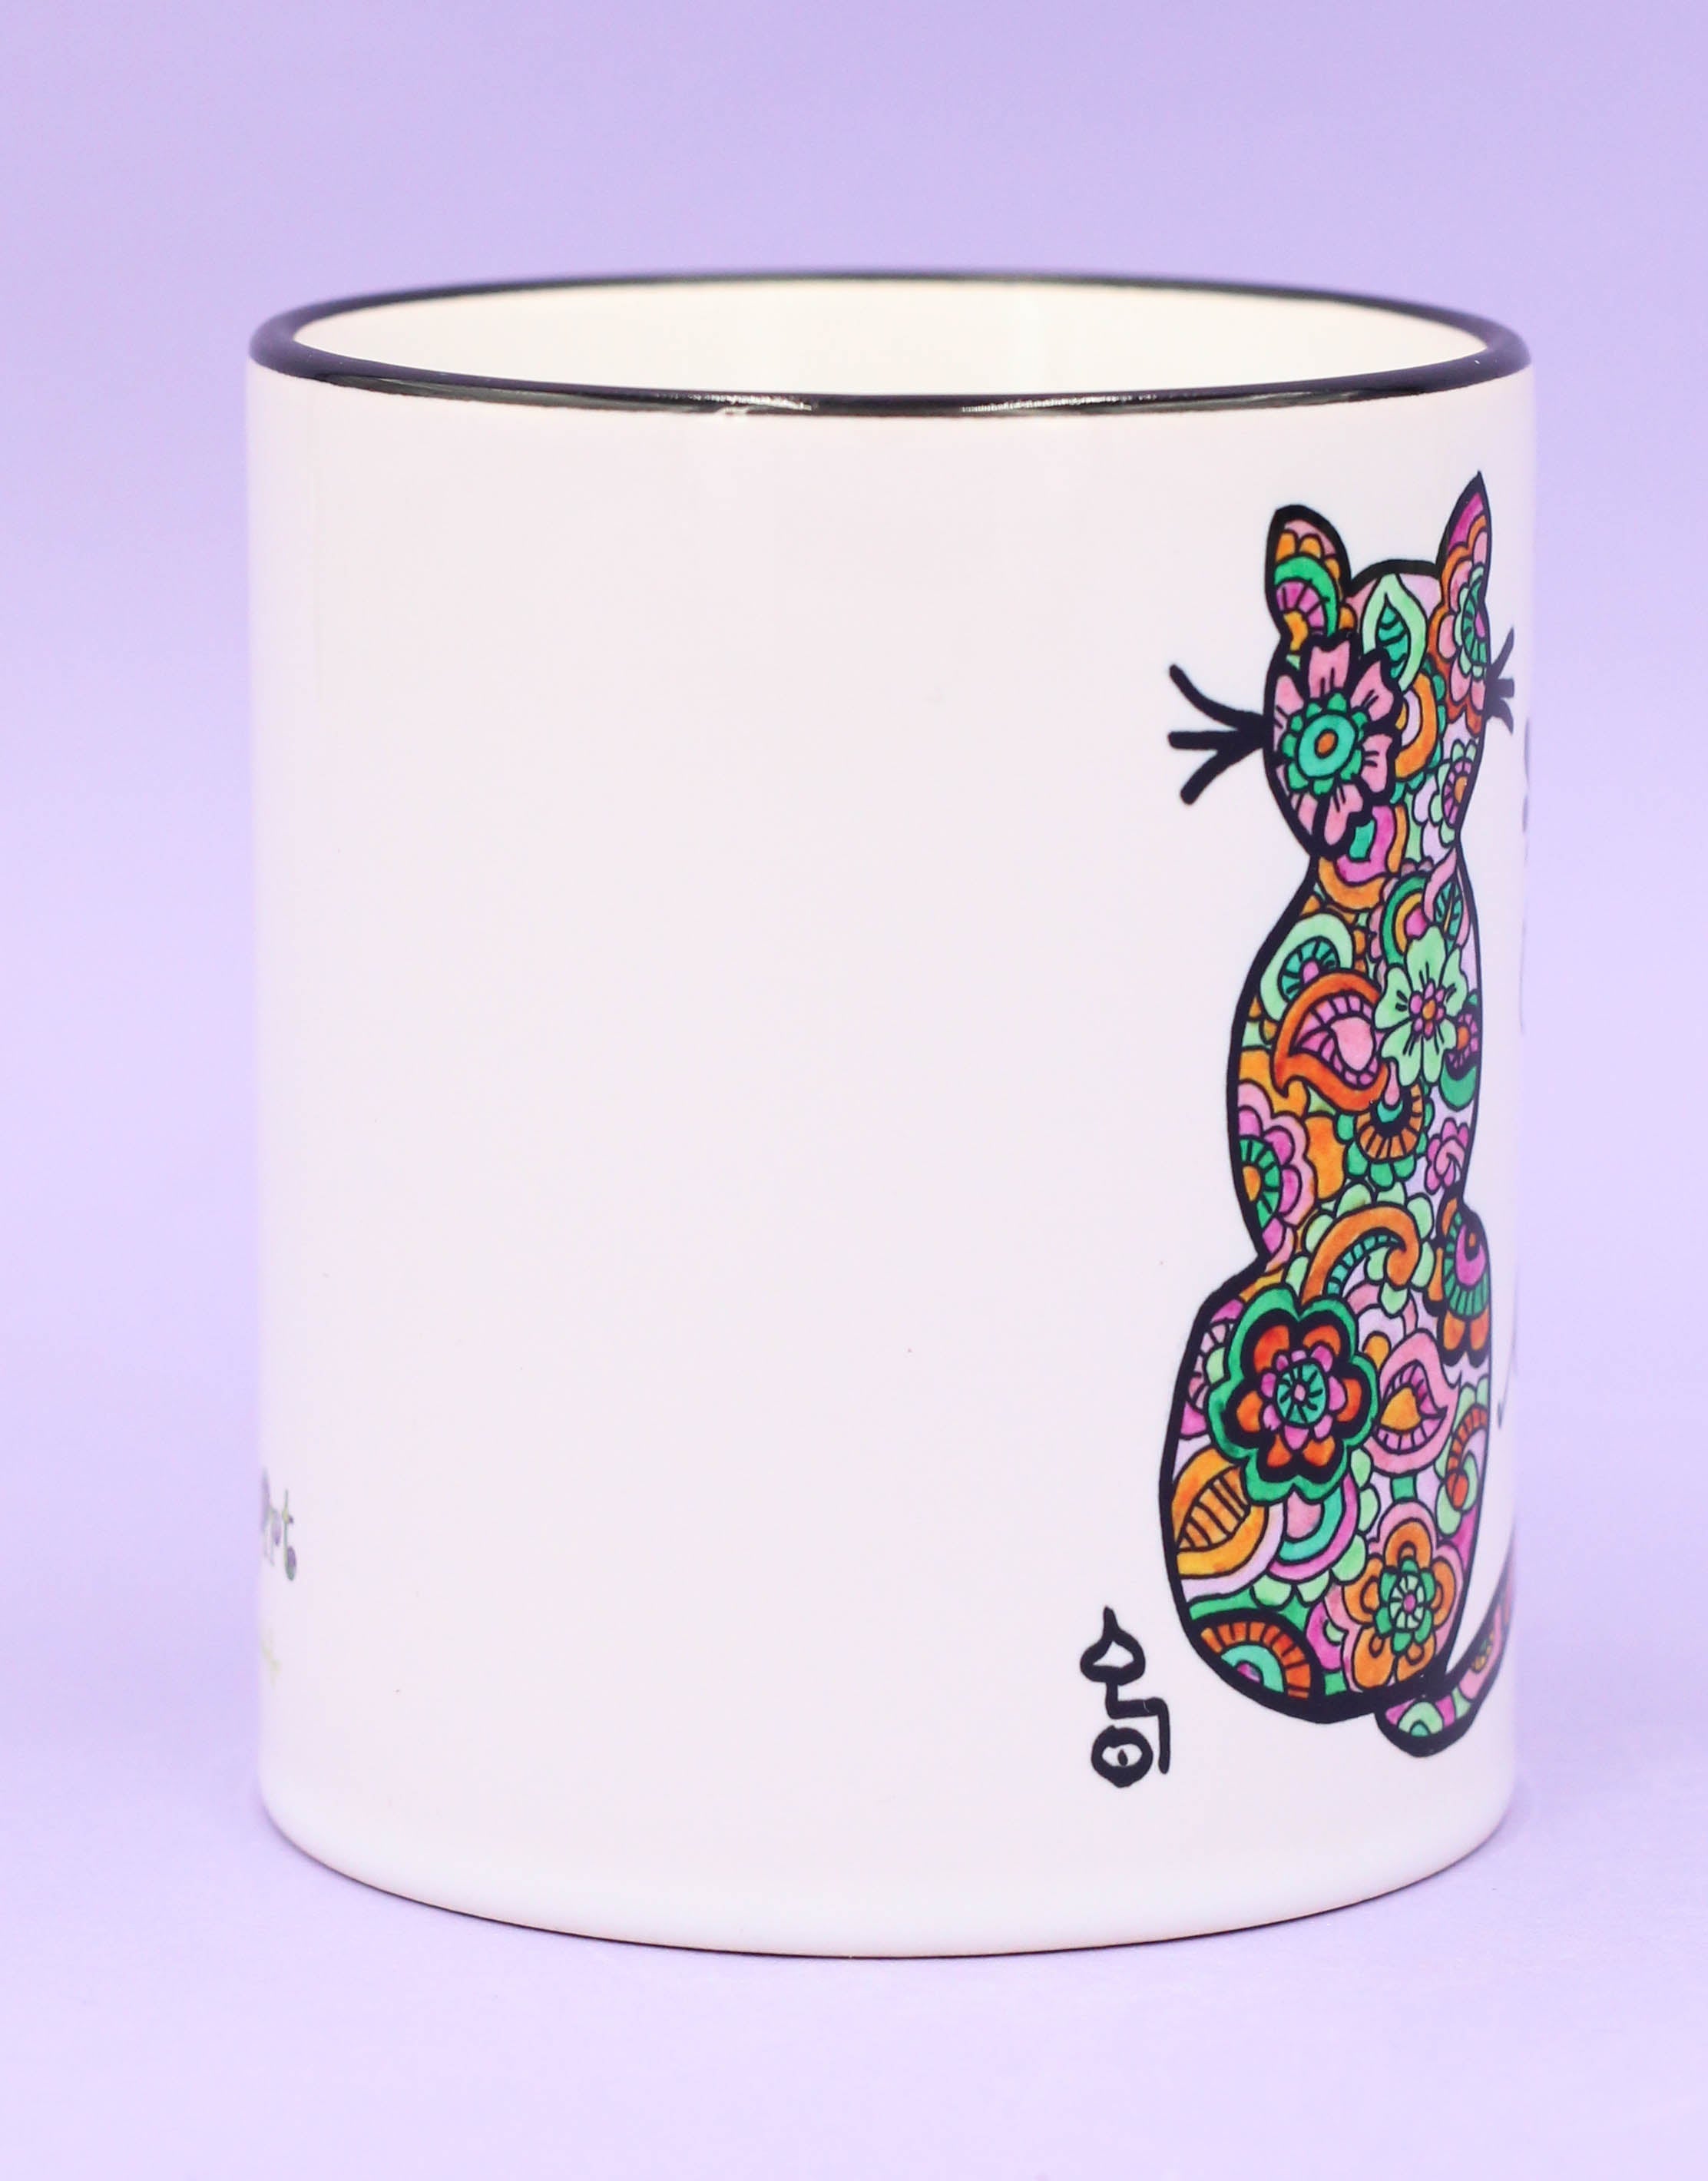 Tasse "All you need is ... cat"-RollinArt